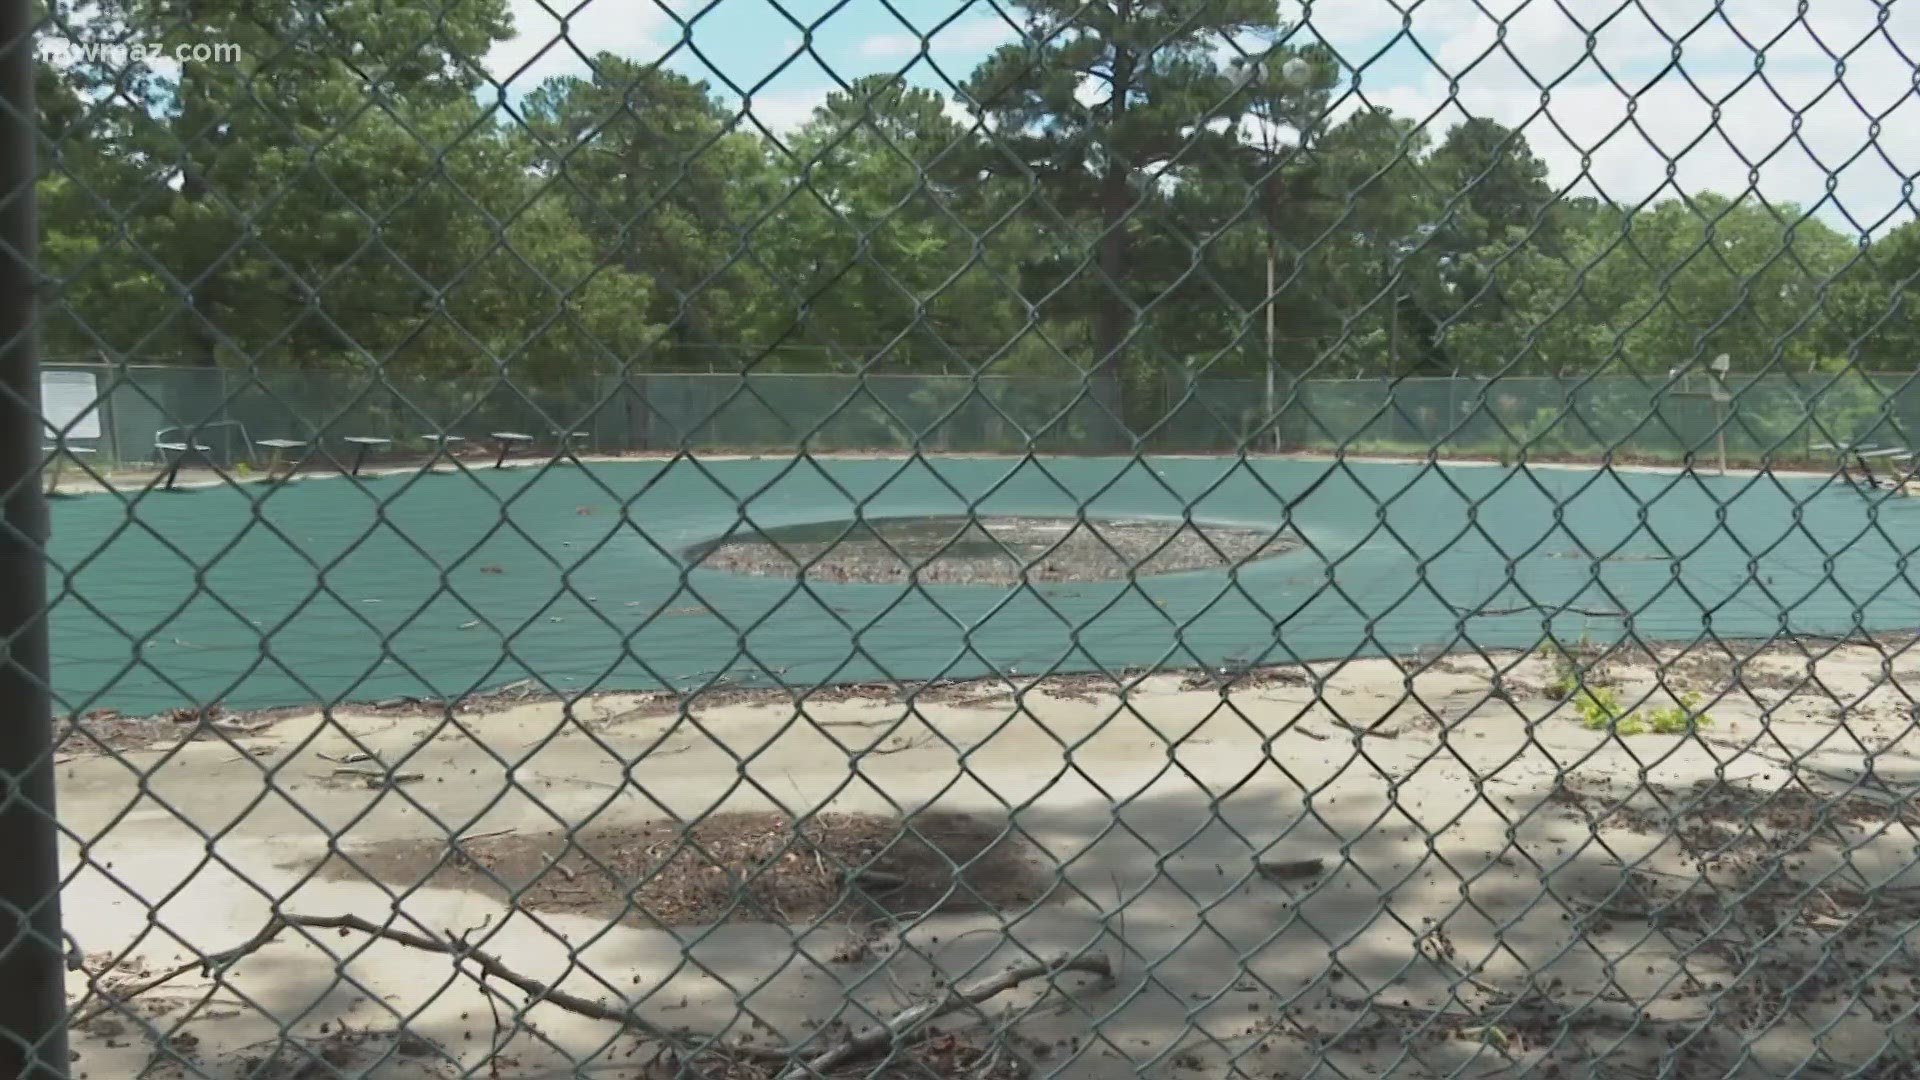 The county says the pool off Rocky Creek Road still needs repair, but how long has the county known about the problem, and what repairs are needed?